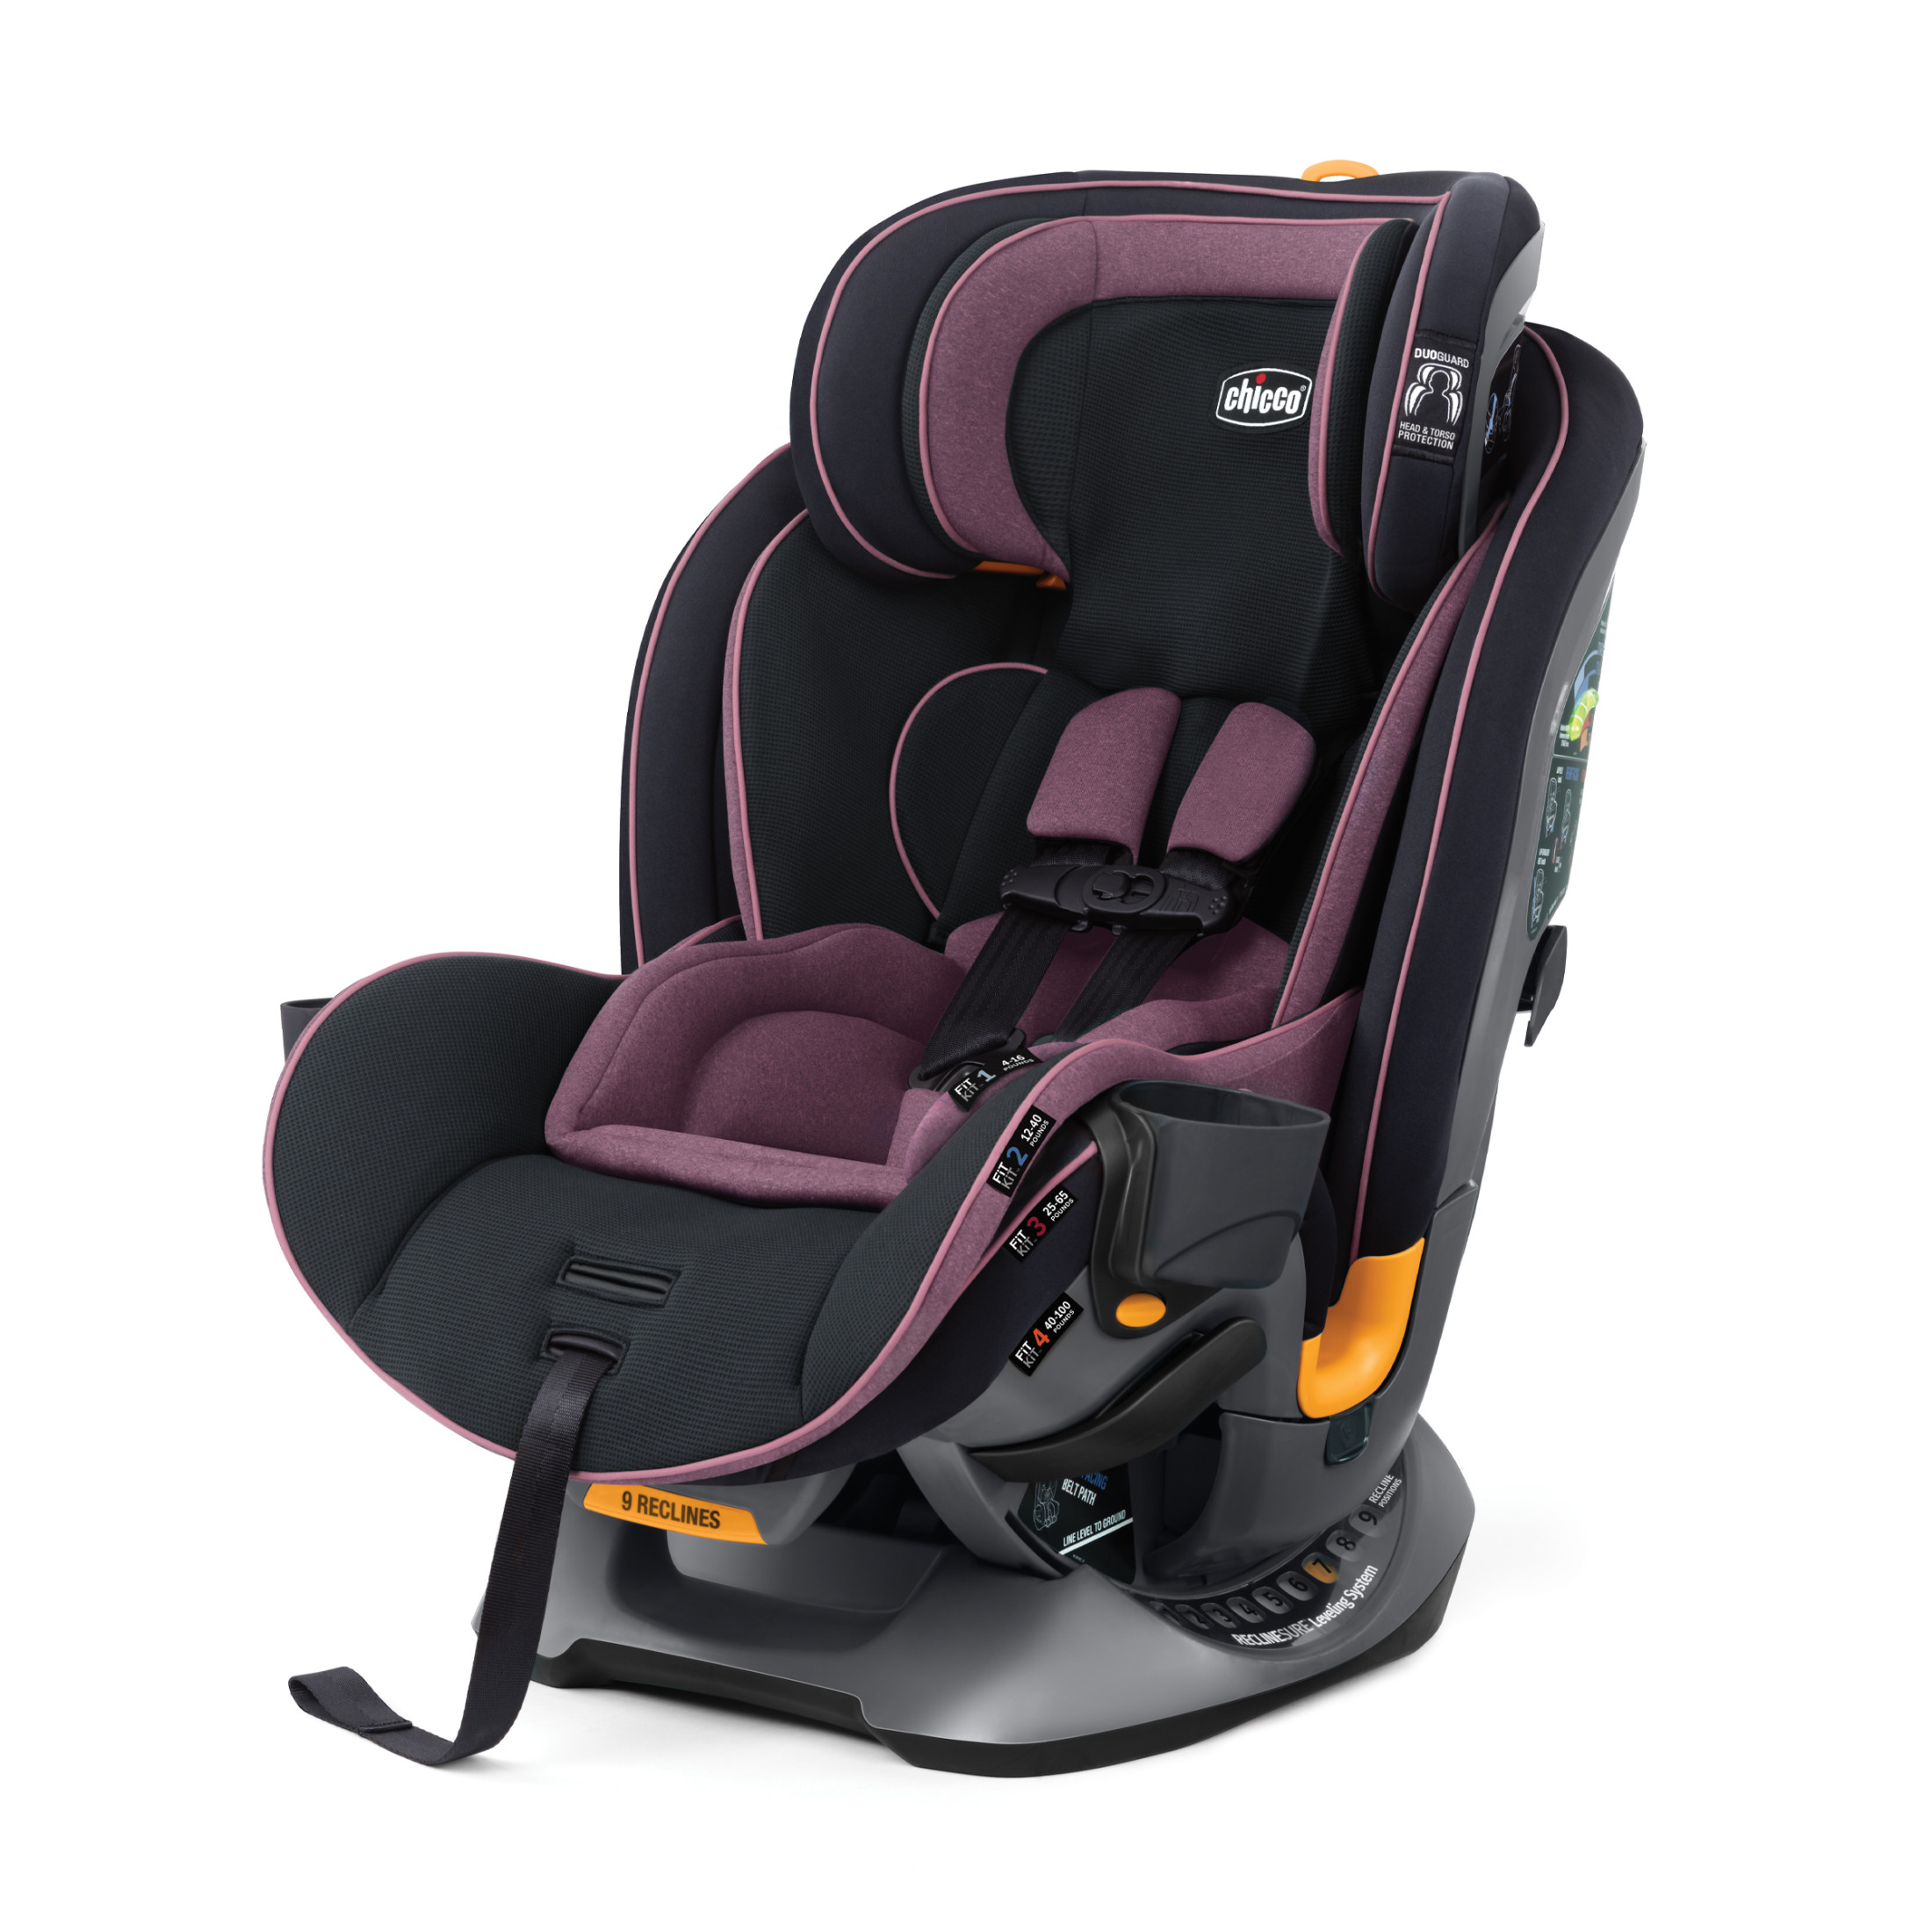 Chicco Fit4 4-in-1 Convertible Car Seat - Carina (Navy/Purple) - image 1 of 13